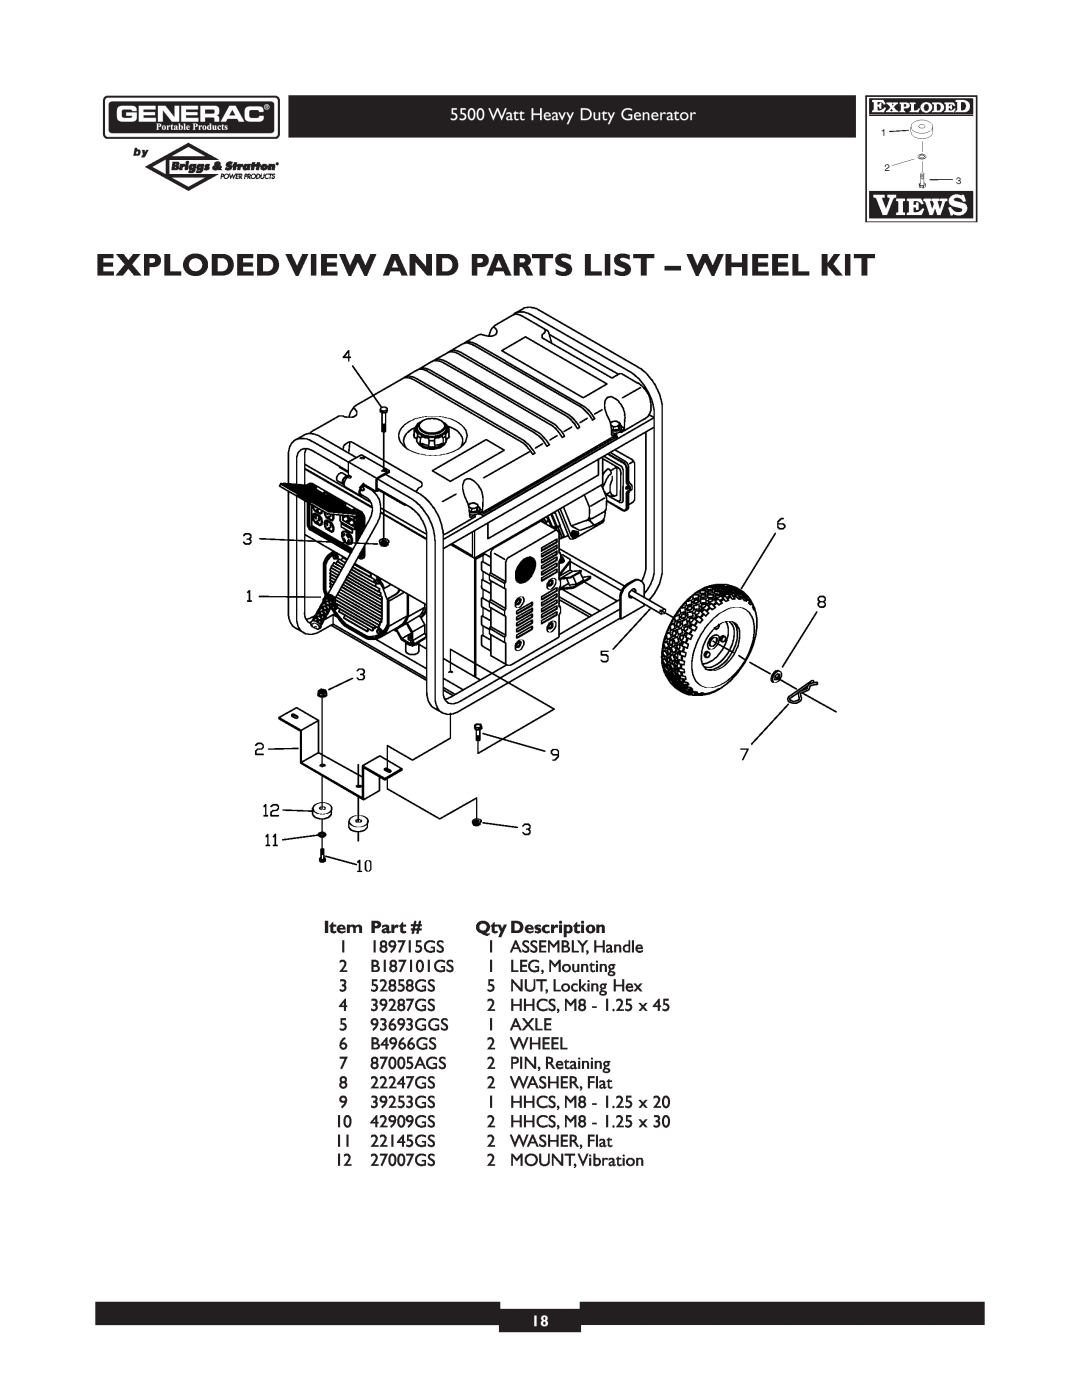 Generac 1654-0 owner manual Exploded View And Parts List - Wheel Kit, Qty Description 